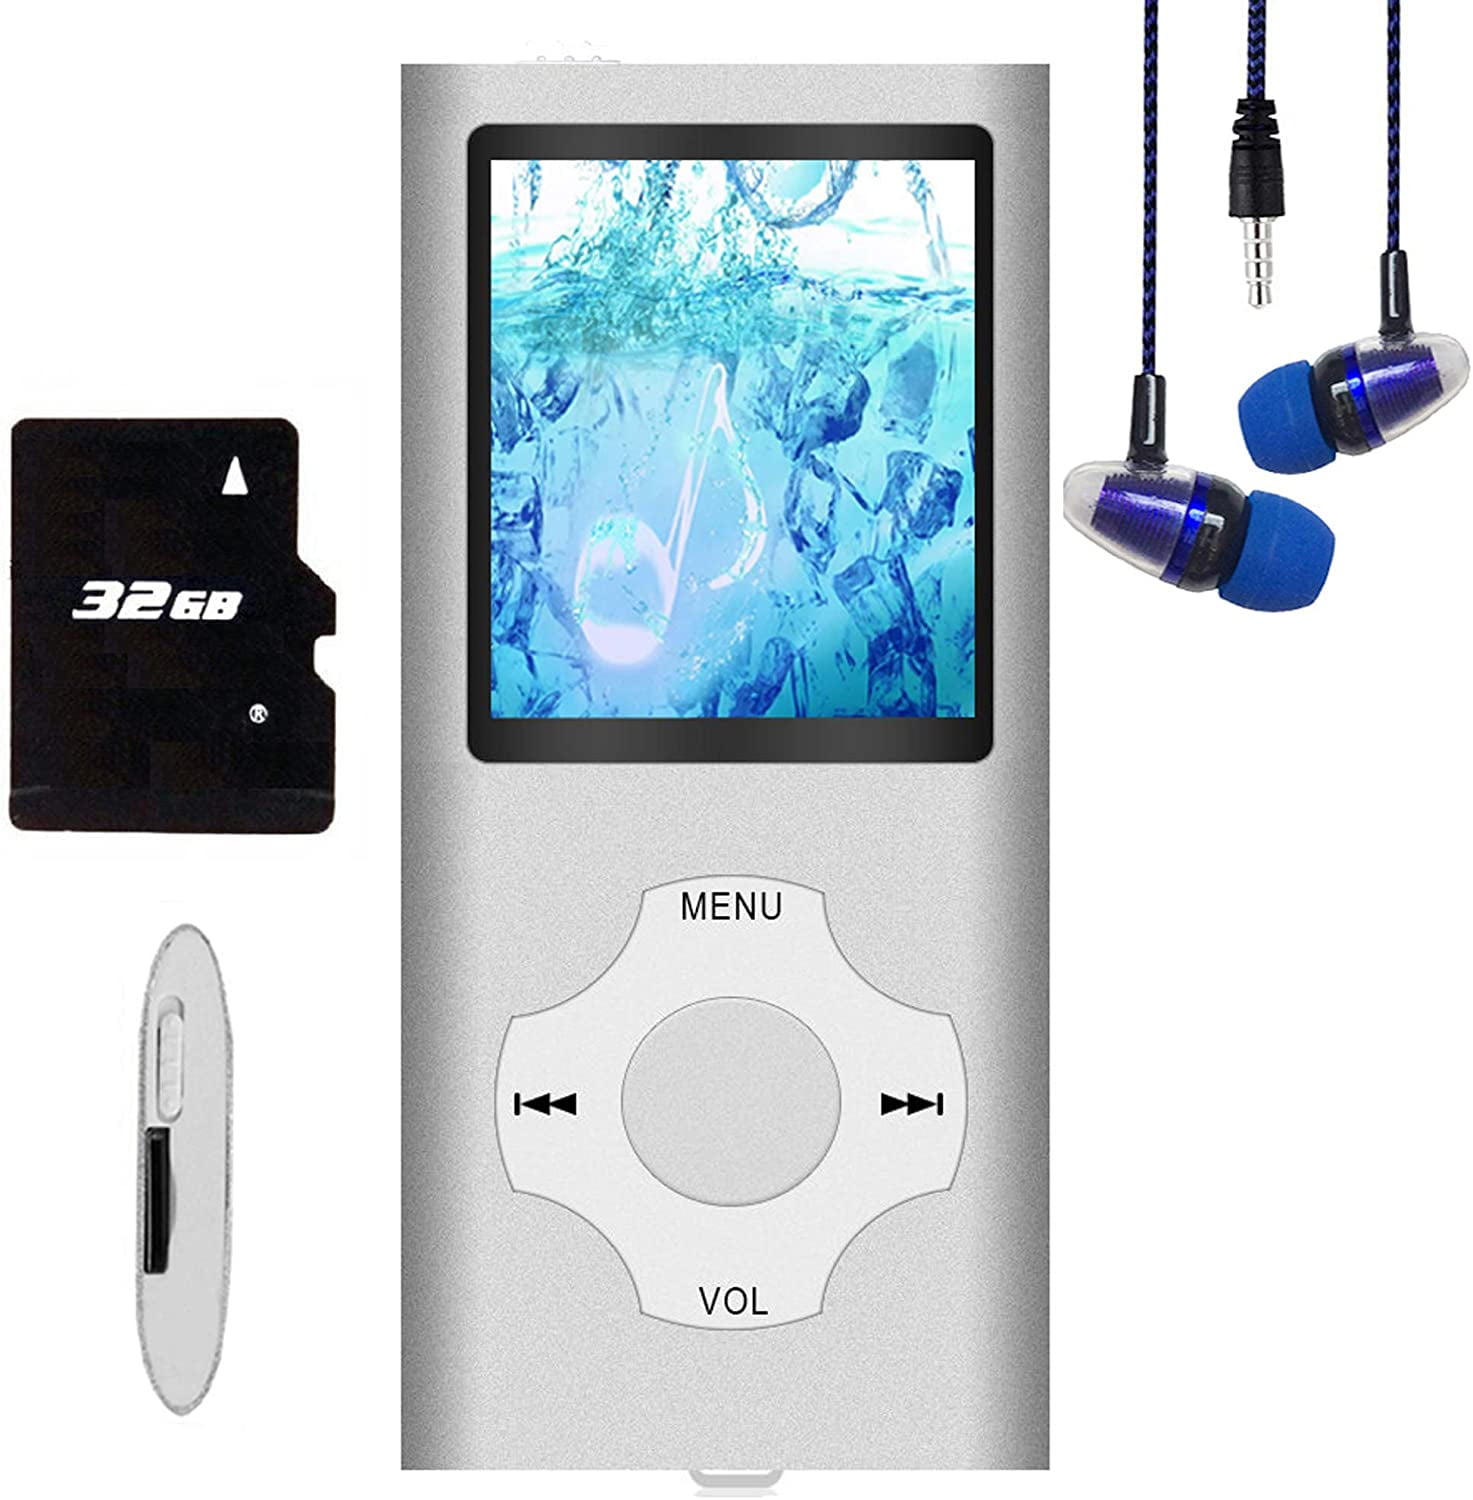 Video/Media/Music Player G.G.Martinsen Silver-with-Black Versatile MP3/MP4 Player with a Micro SD Card MP4 Player Digital MP3 Player Support Photo Viewer Mini USB Port 1.8 LCD 